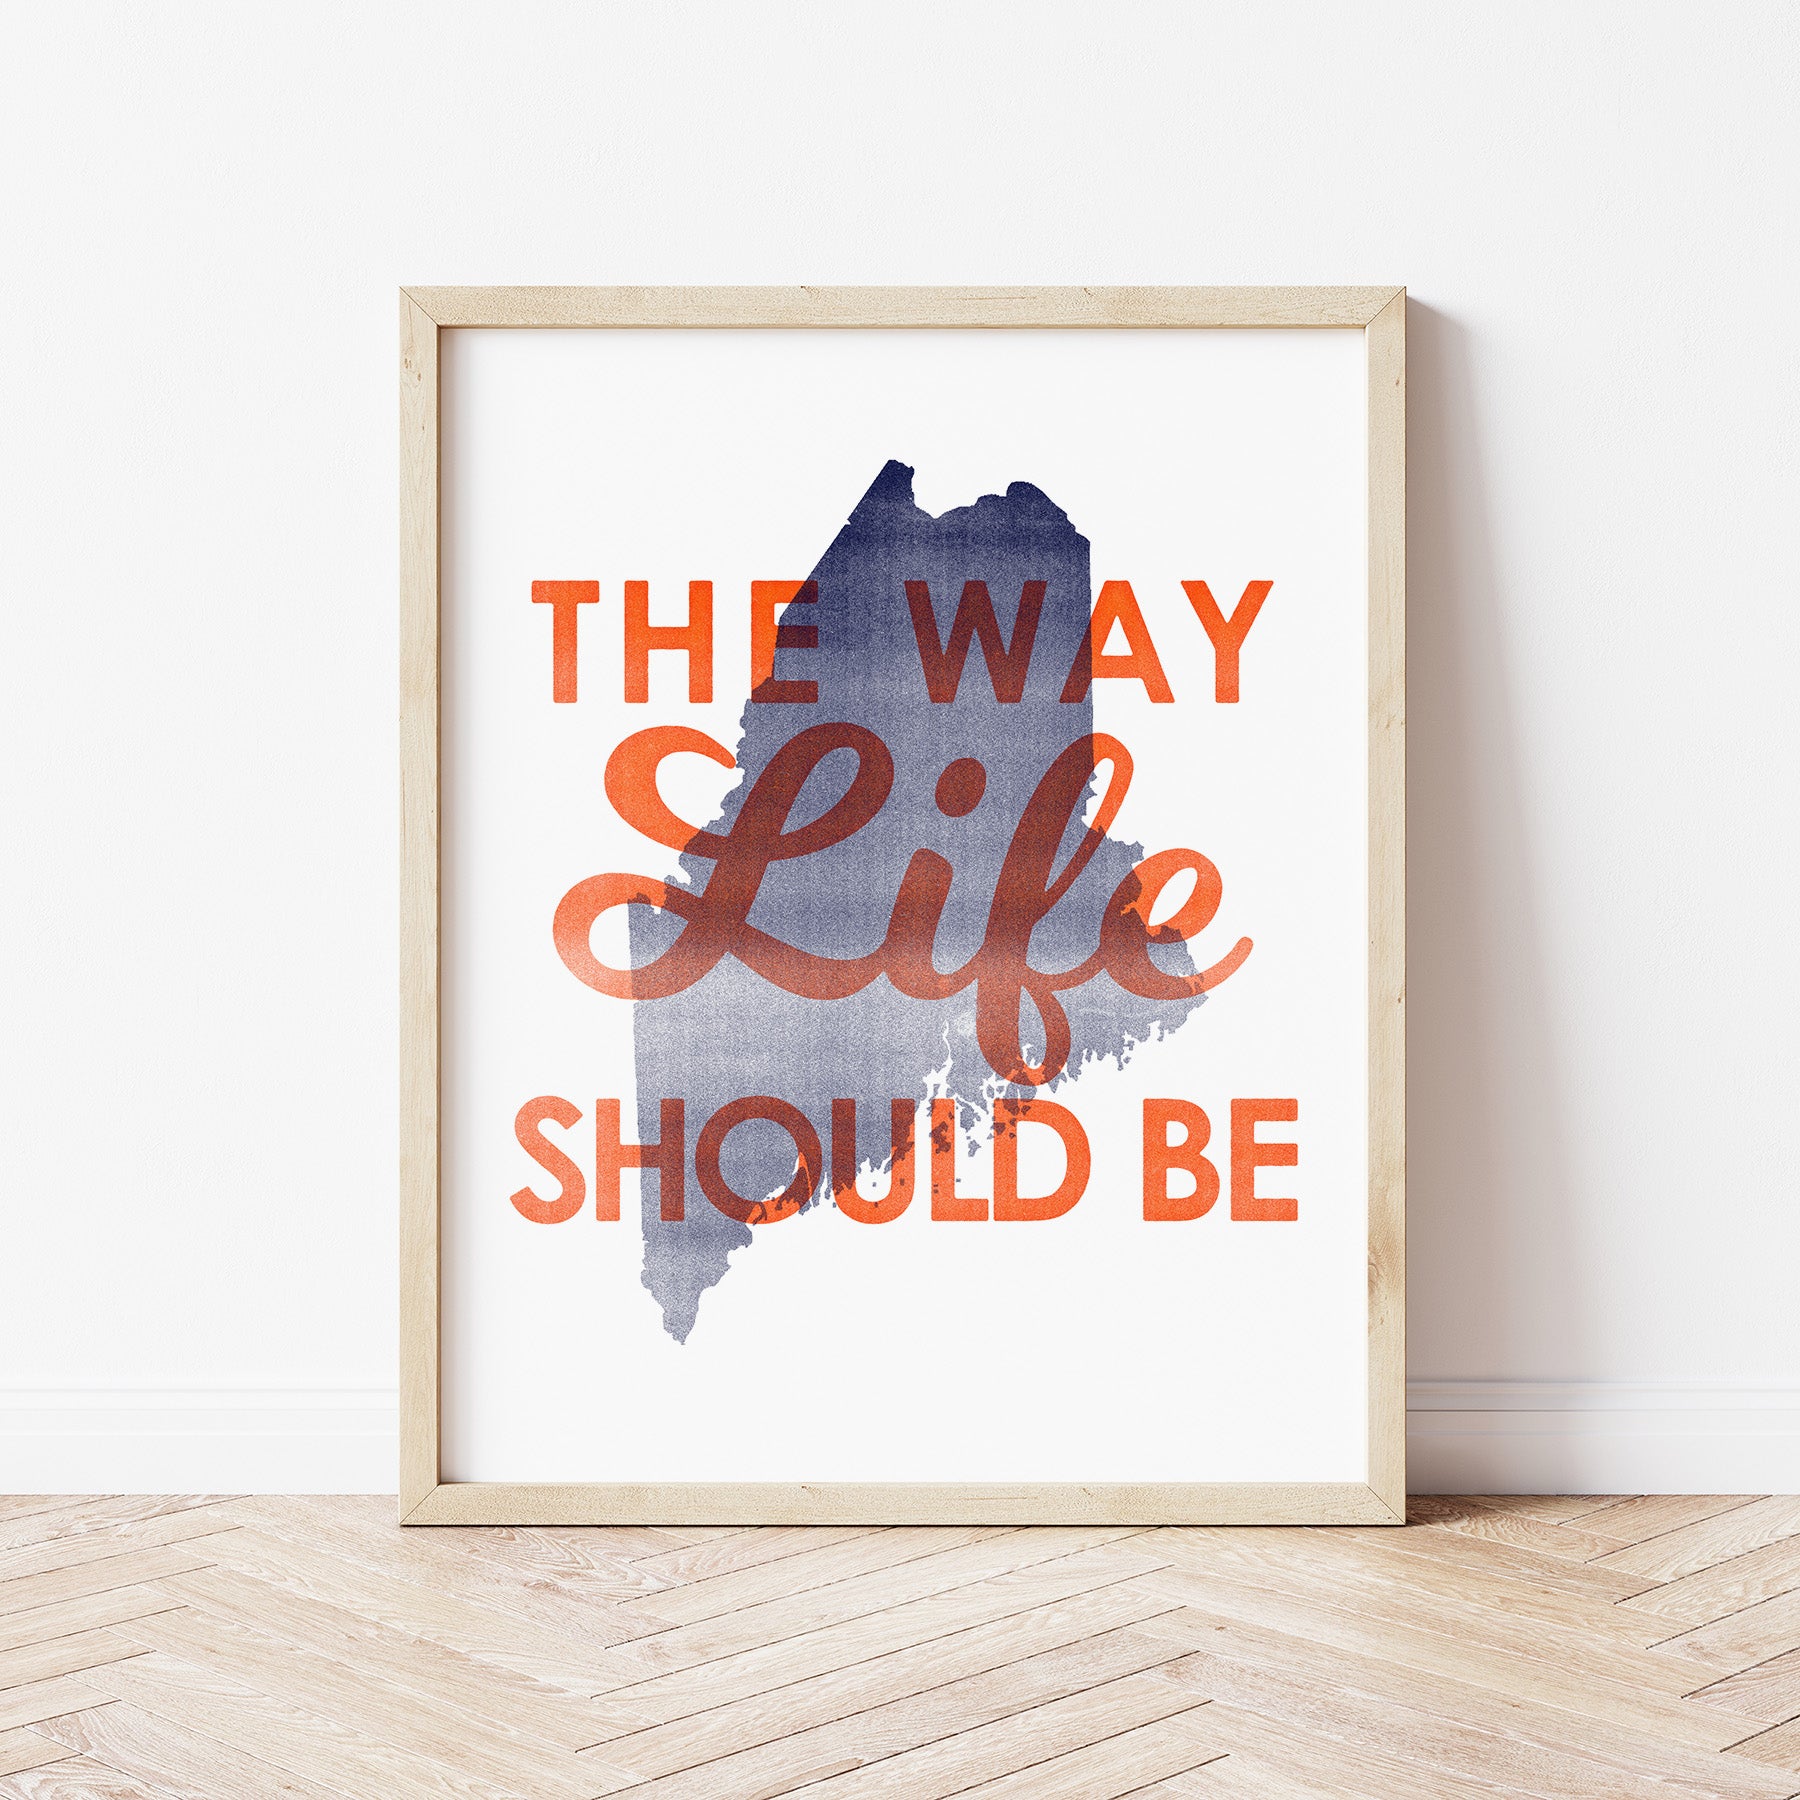 'The Way Life Should Be' Maine Art Print, Script Font by Gert & Co